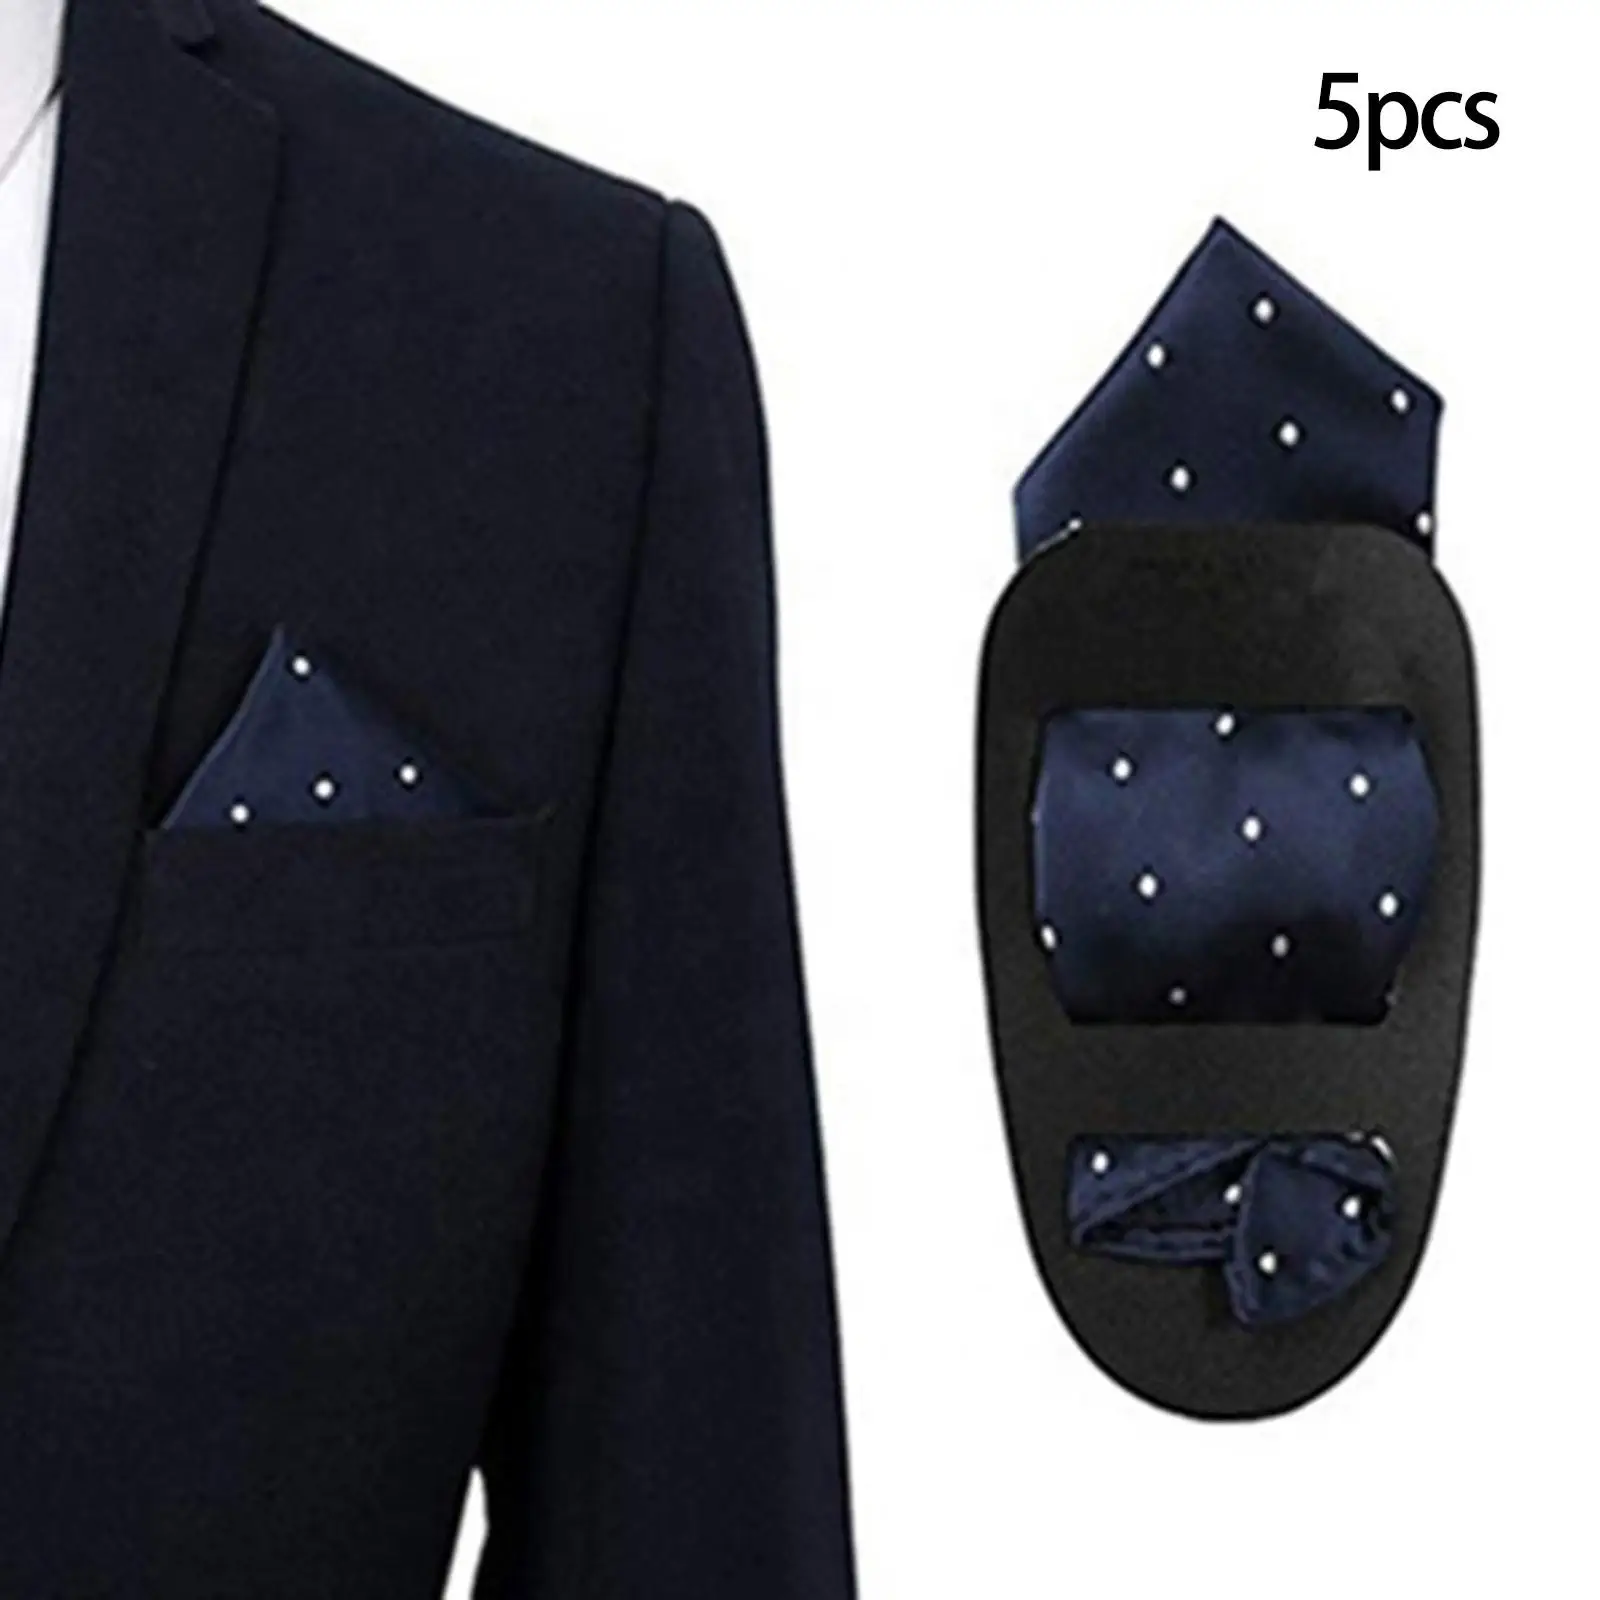 5x Pocket Square Holder Fixing Bracket for MenS suits Accessories Tuxedos